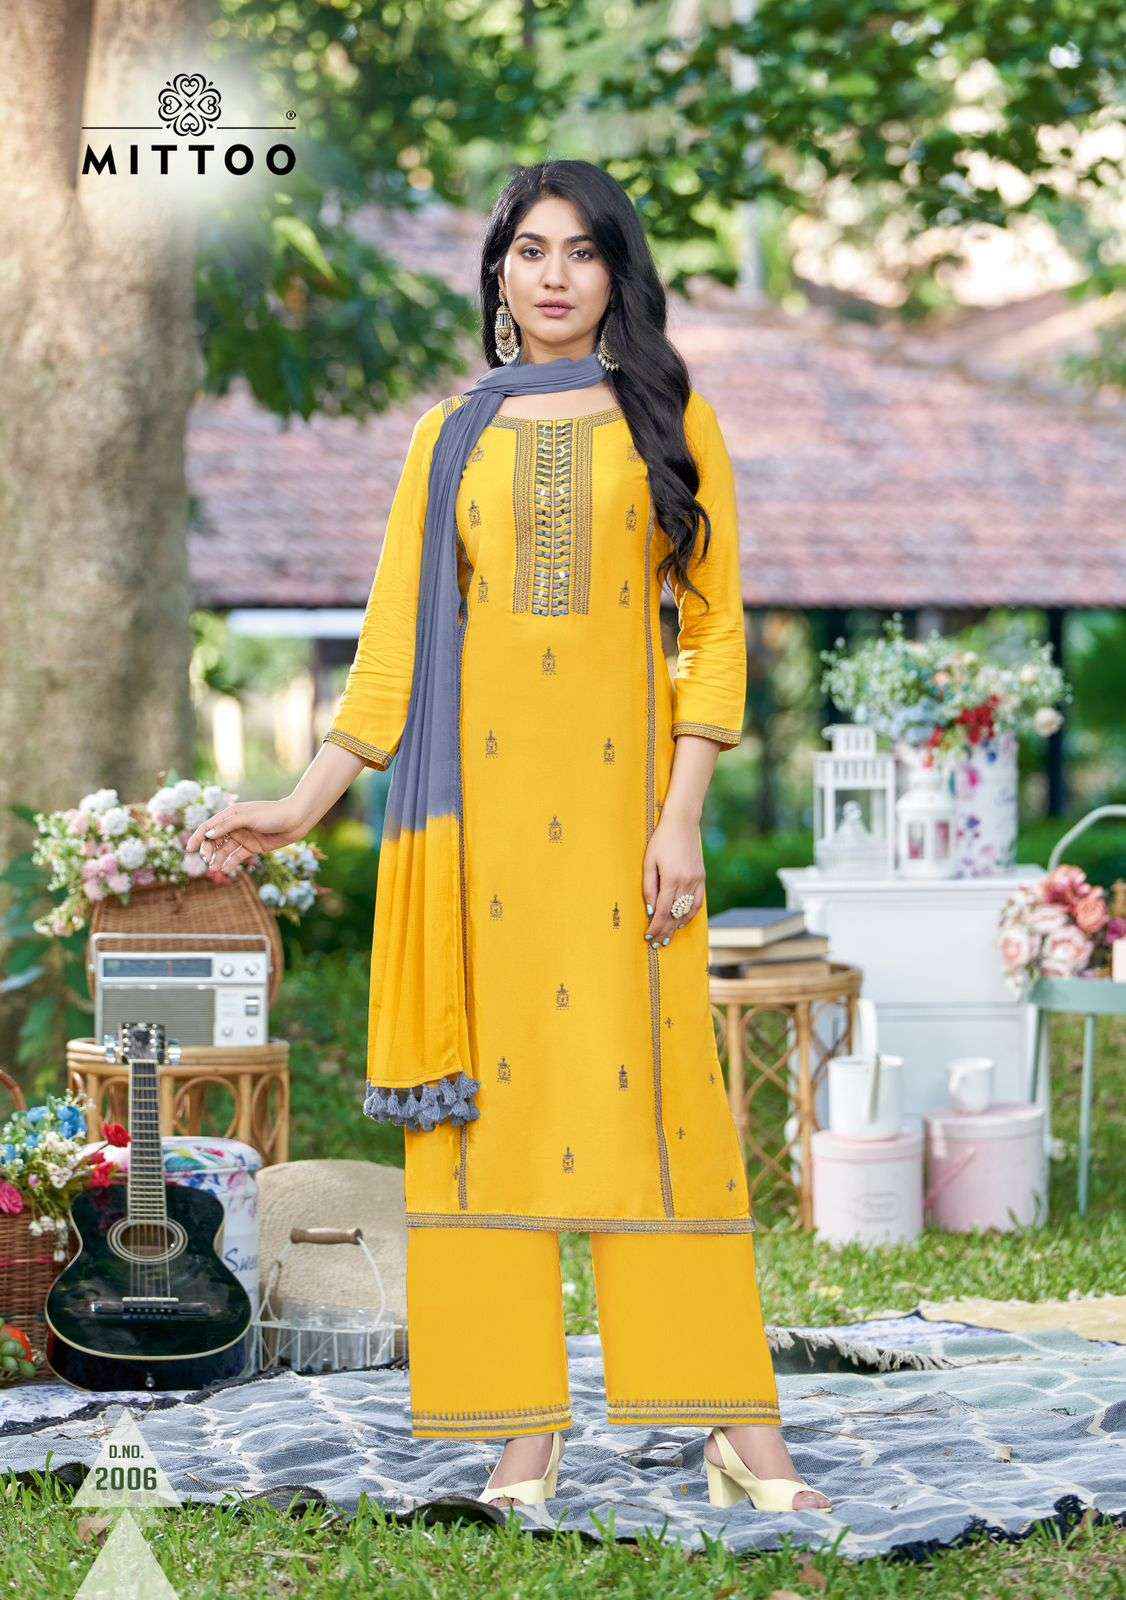 Mittoo Roop Festive Collection Party Wear Readymade Suits ( 6 Pcs Catalog )